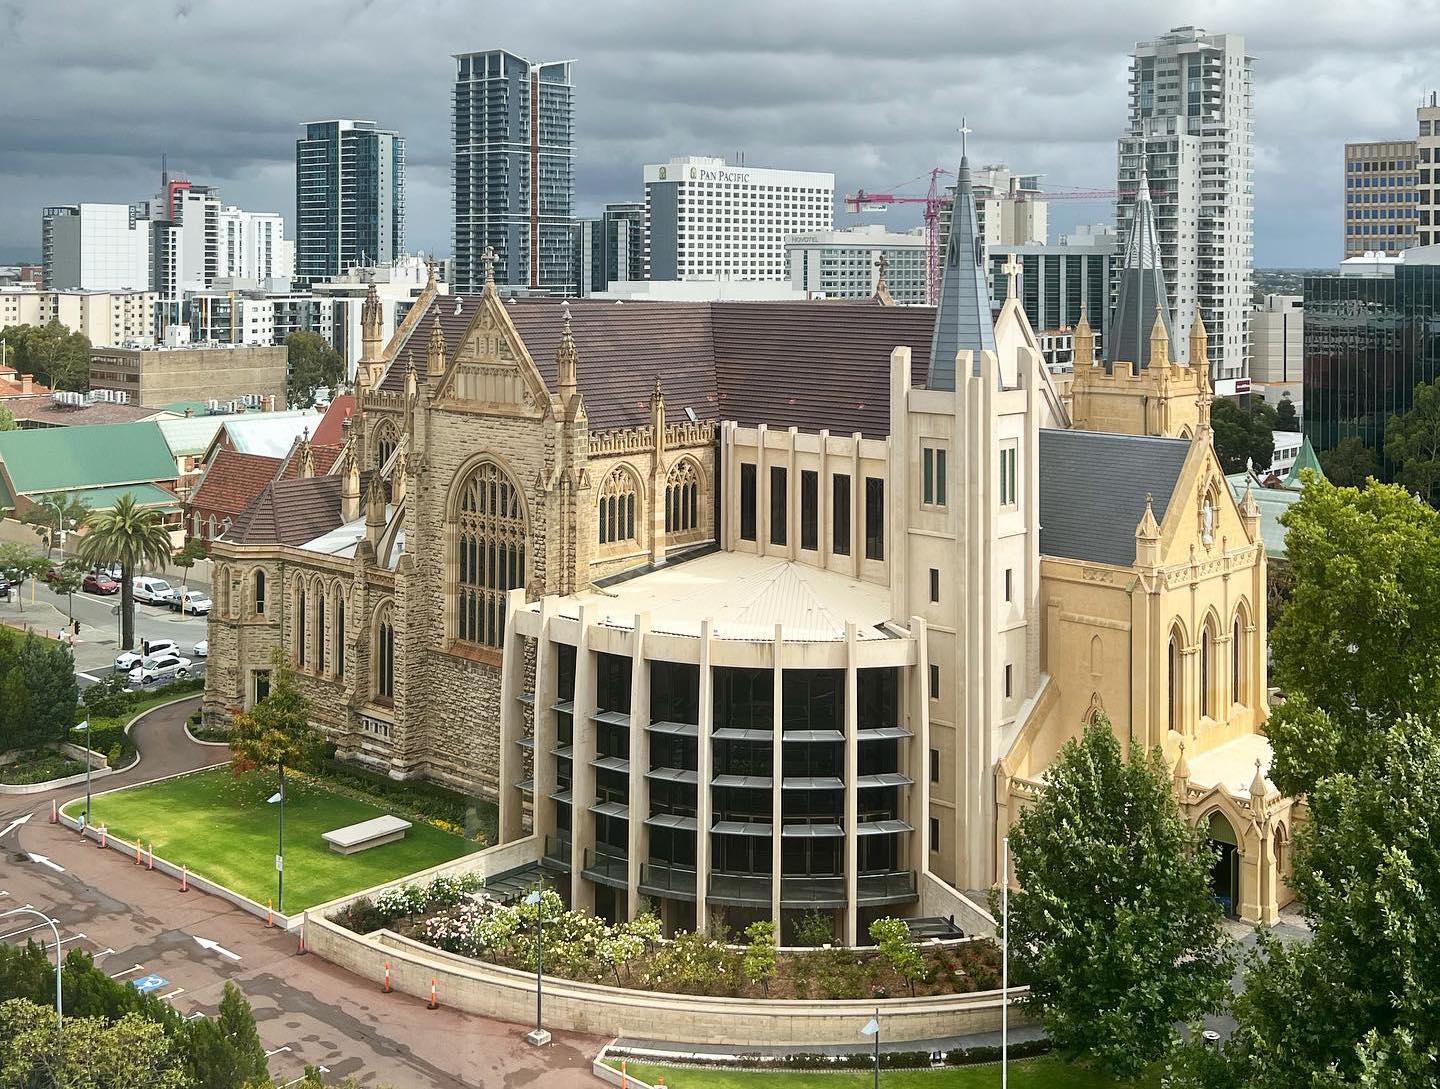 St Mary's Cathedral, Perth